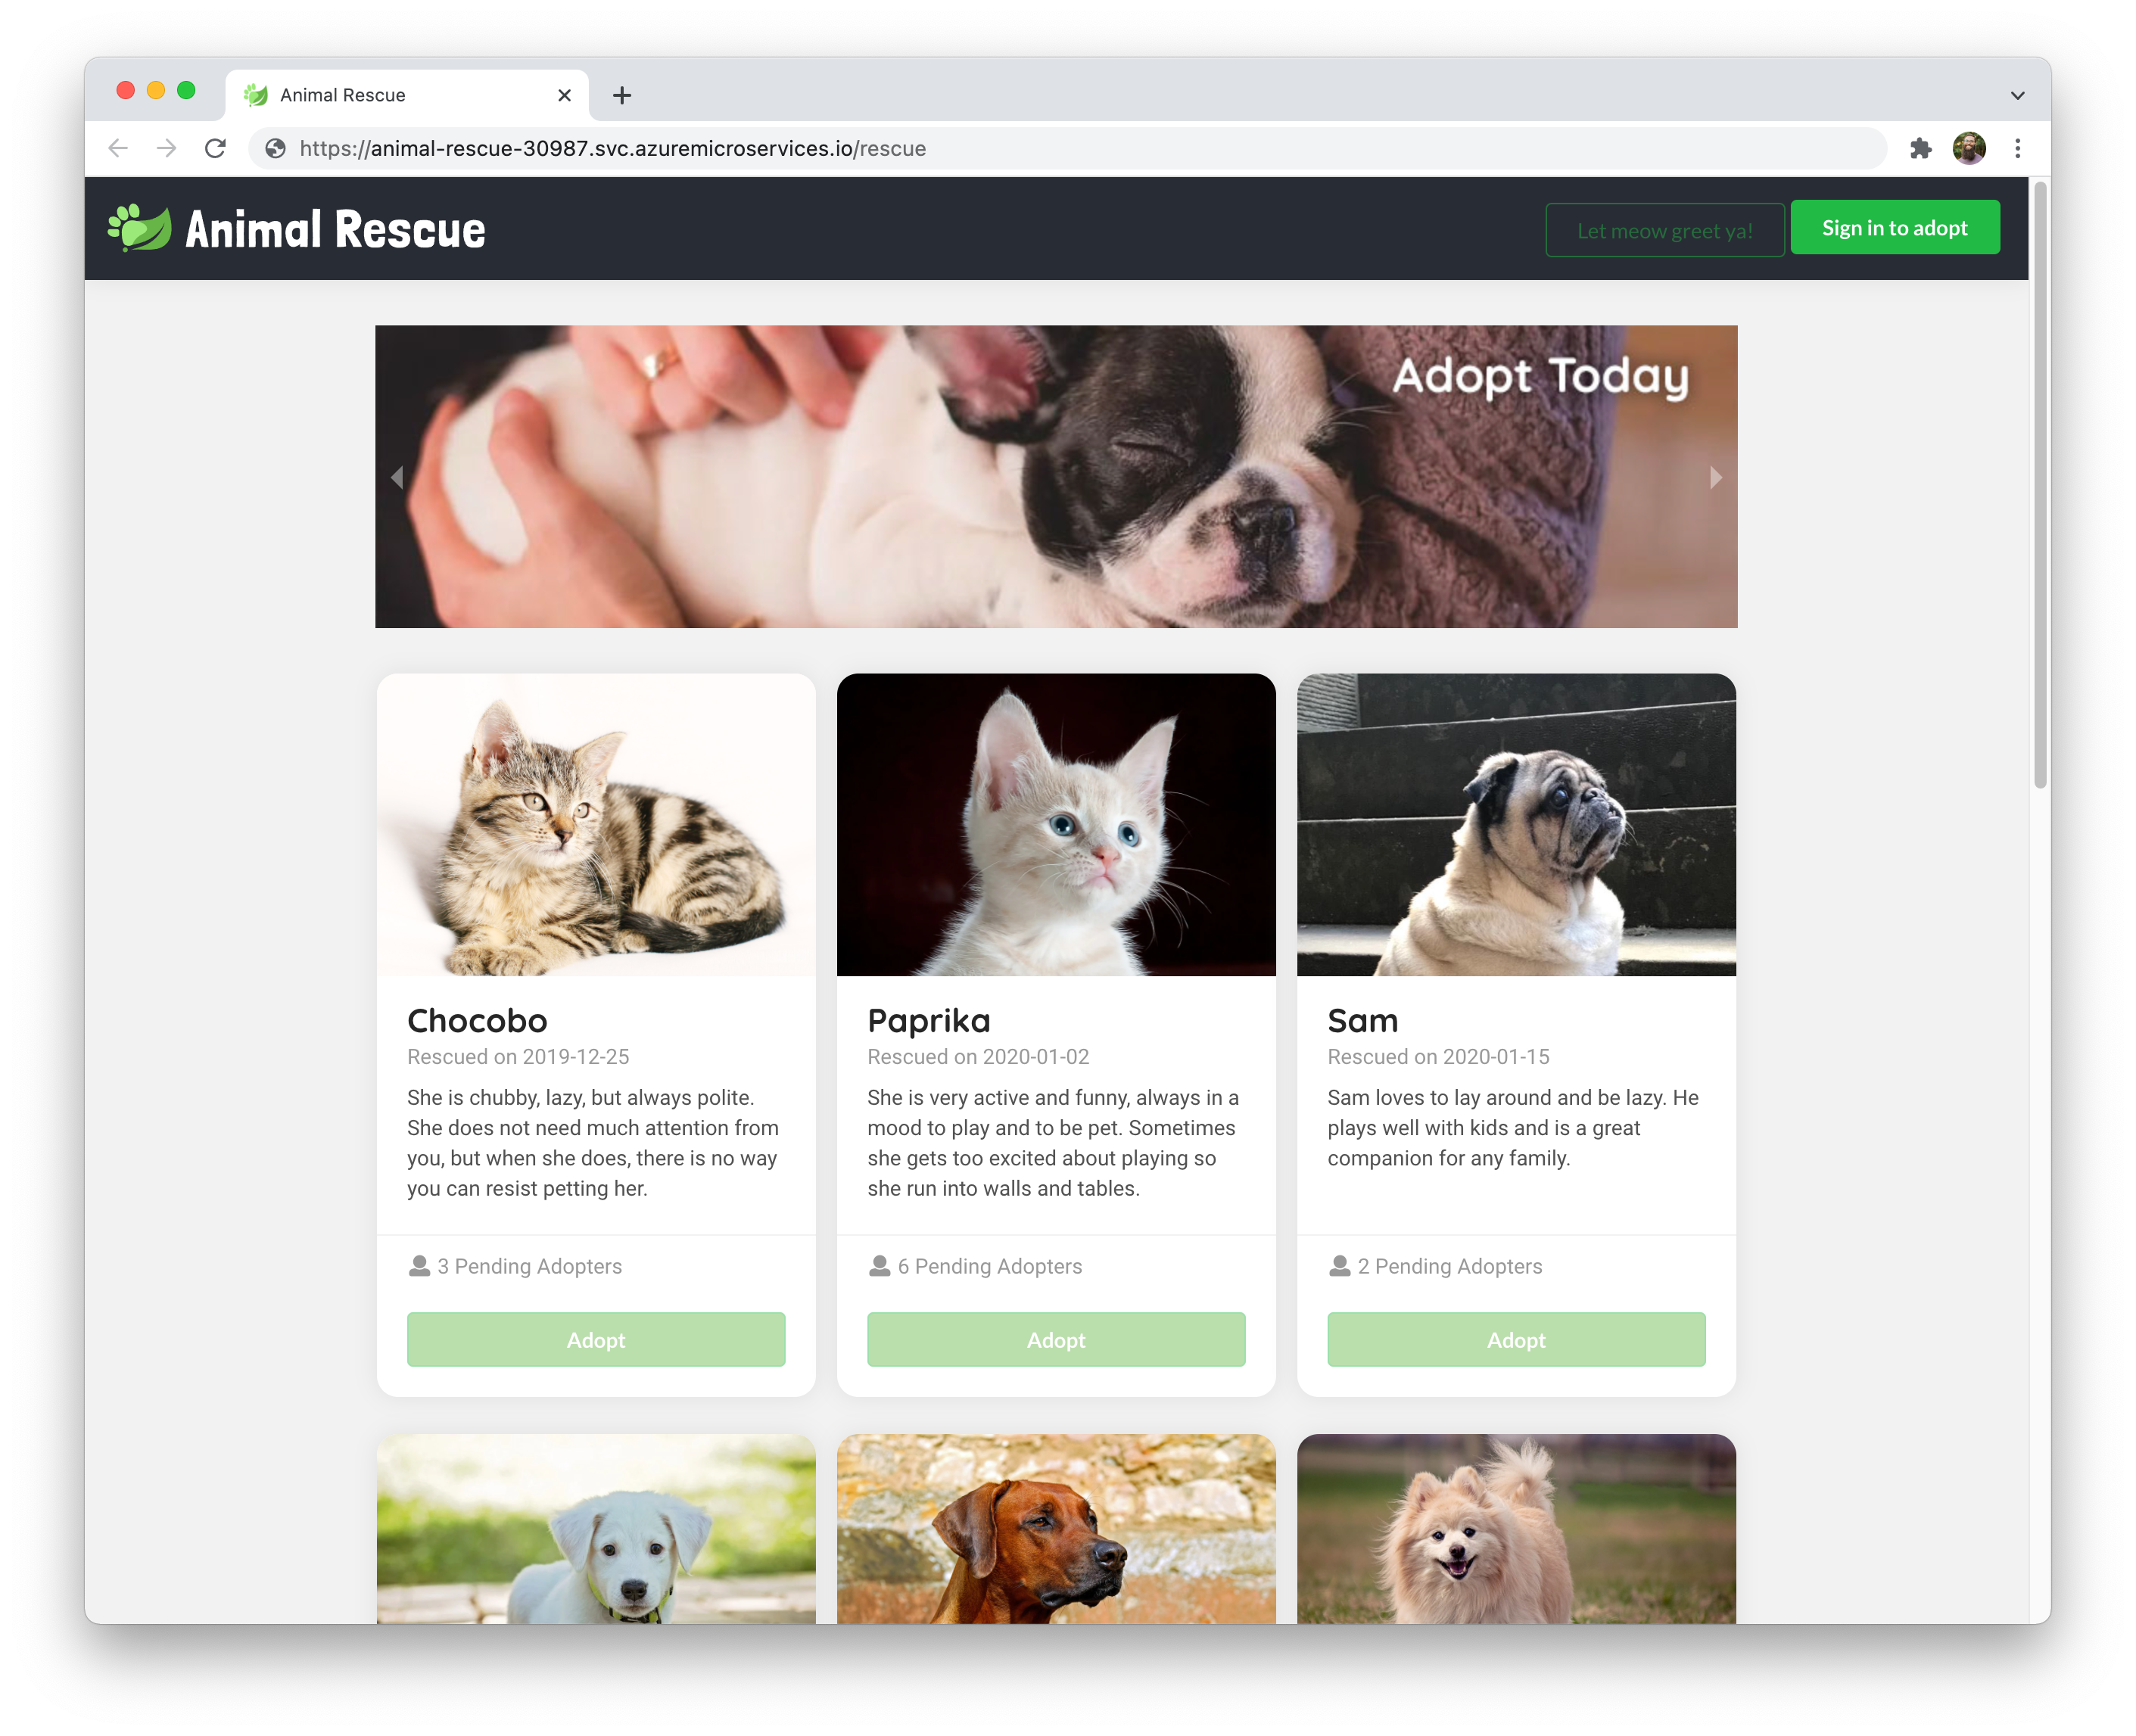 An image of the Animal Rescue application homepage